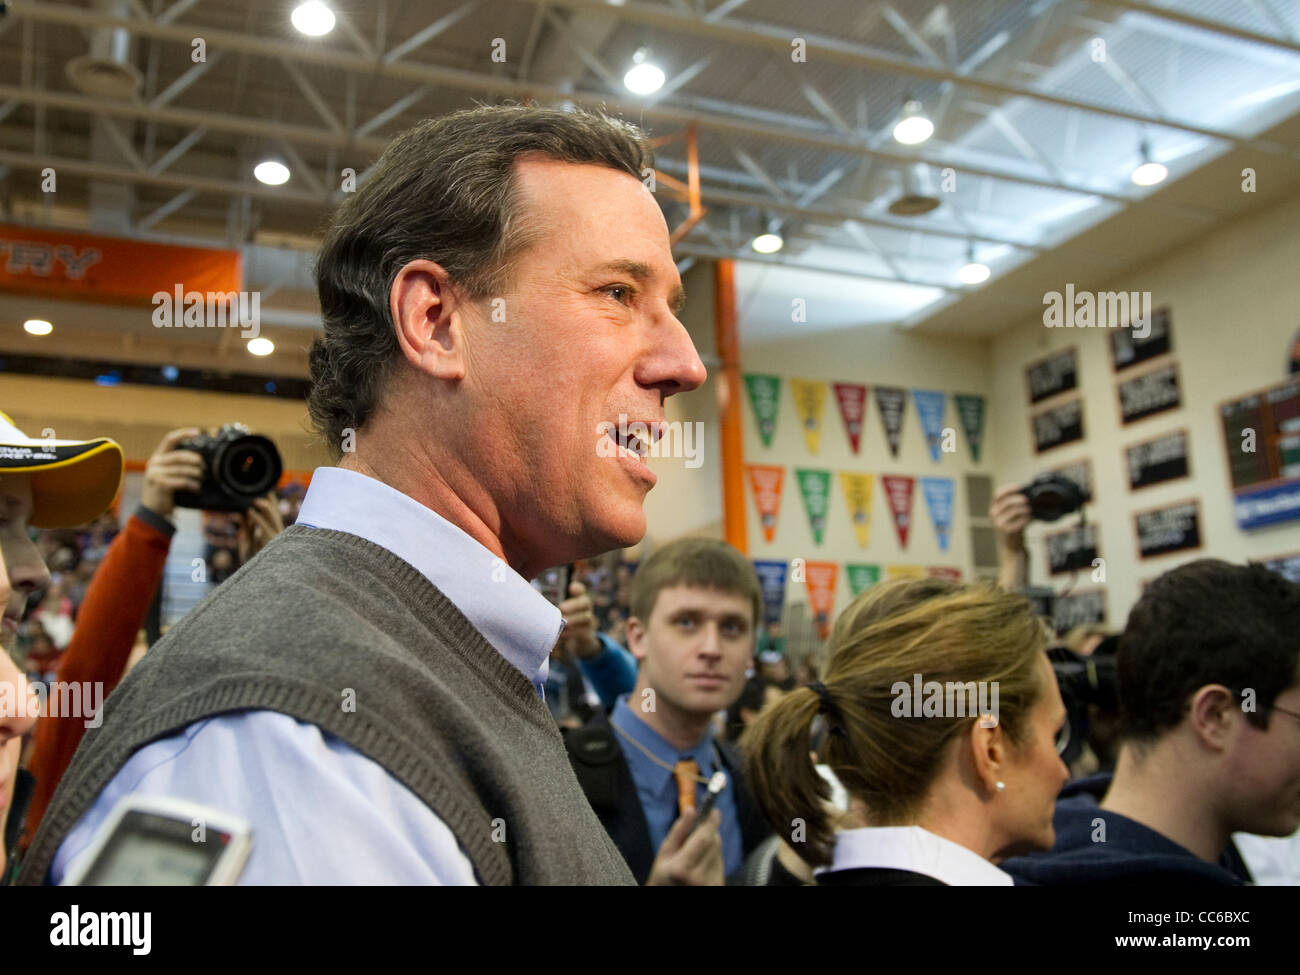 Republican USA presidential candidate Rick Santorum at a high school rally the morning of the Iowa Caucuses on January 3, 2012. Stock Photo